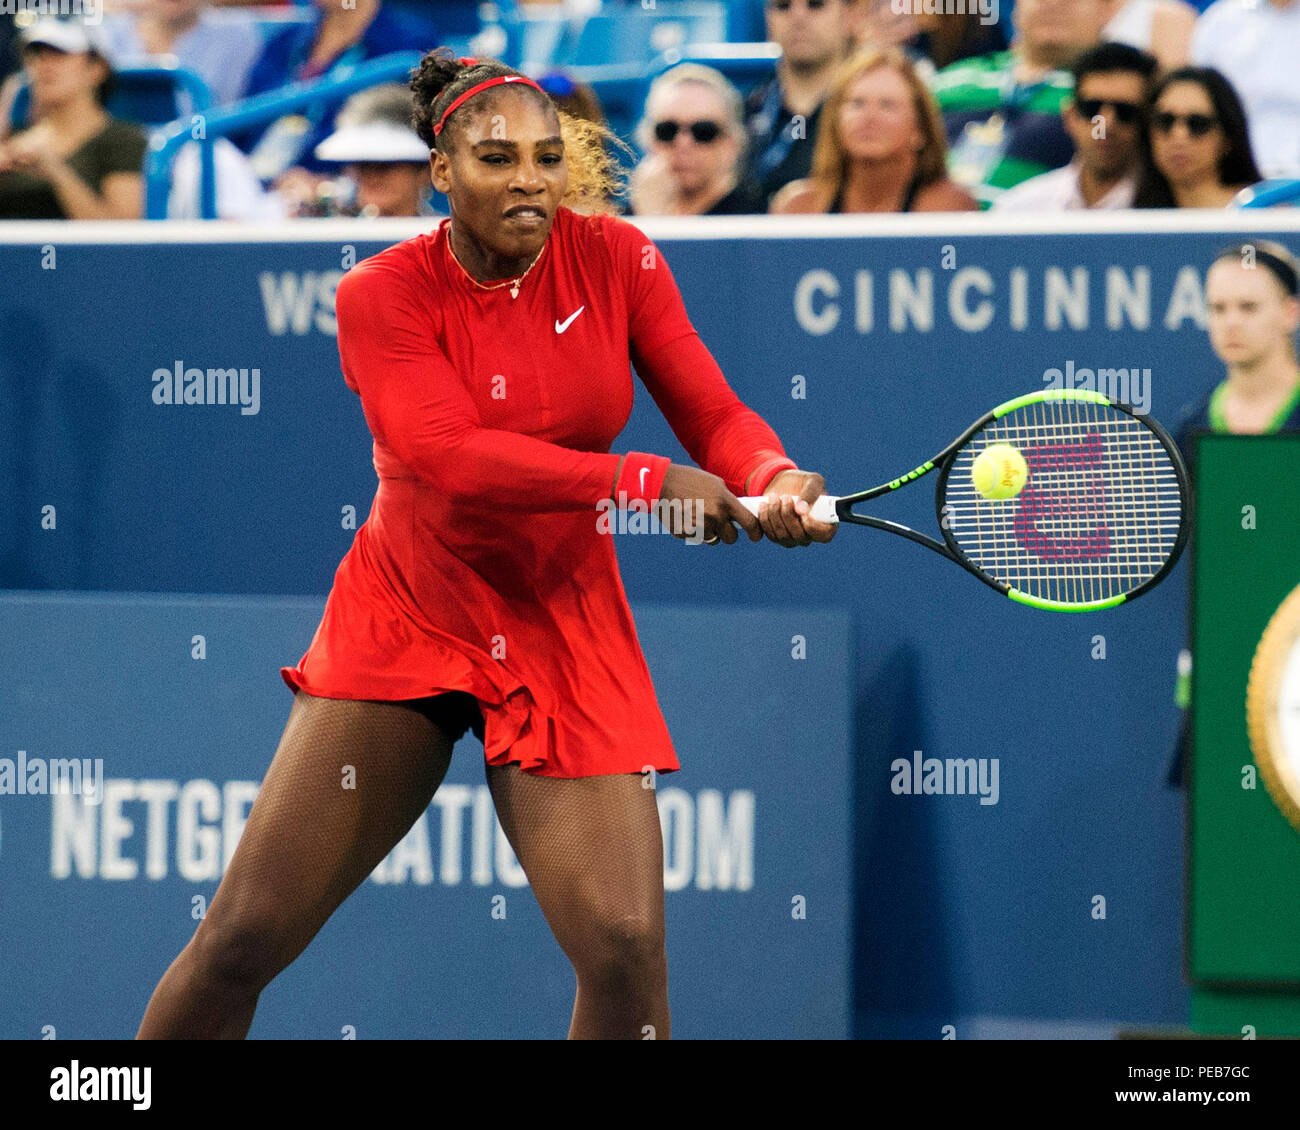 Mason, Ohio, USA. August 13, 2018: Serena Wiliams (USA) hits the ball back to Daria Gavrilova (AUS) at the Western Southern Open in Brent Clark/Alamy Live News Stock Photo